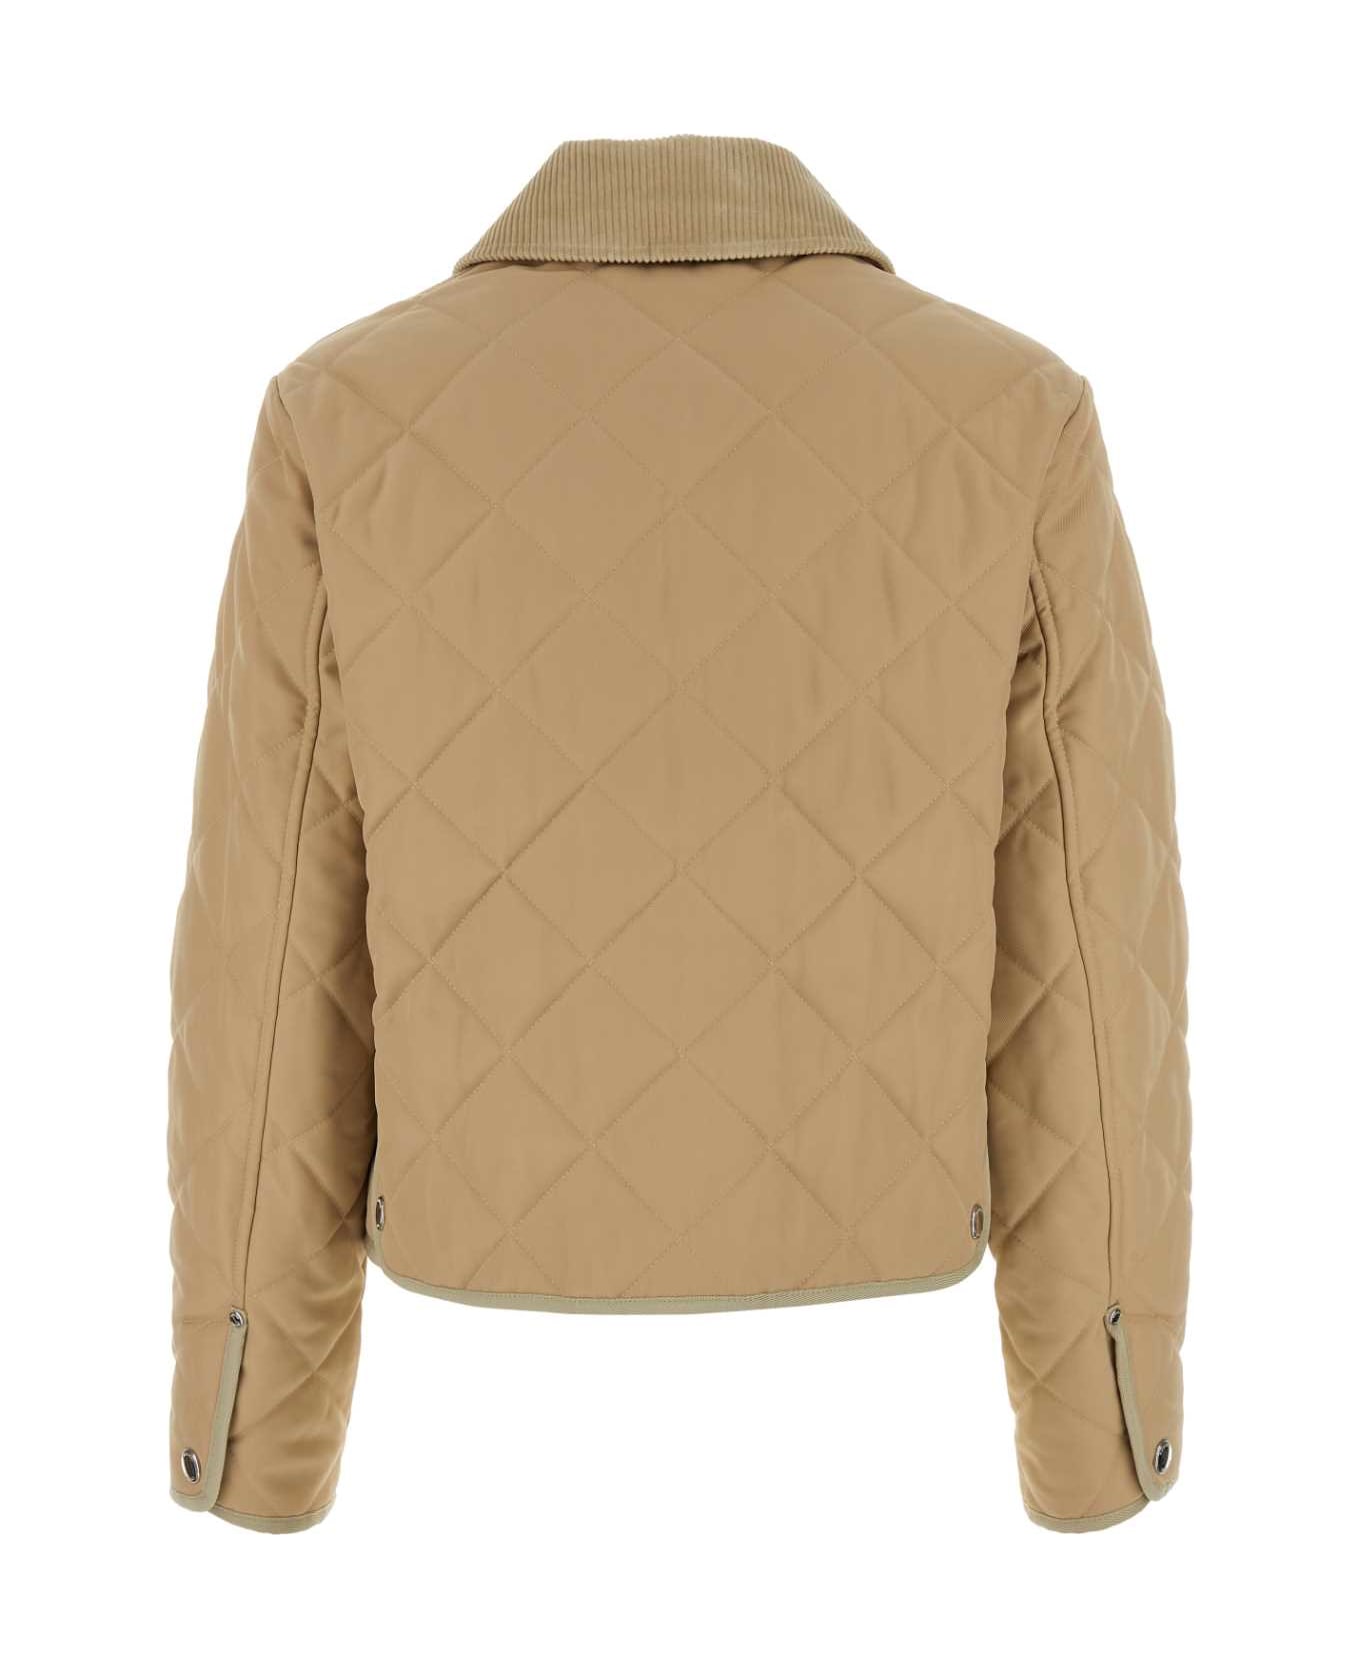 Burberry Beige Polyester Padded Jacket - SOFTFAWN